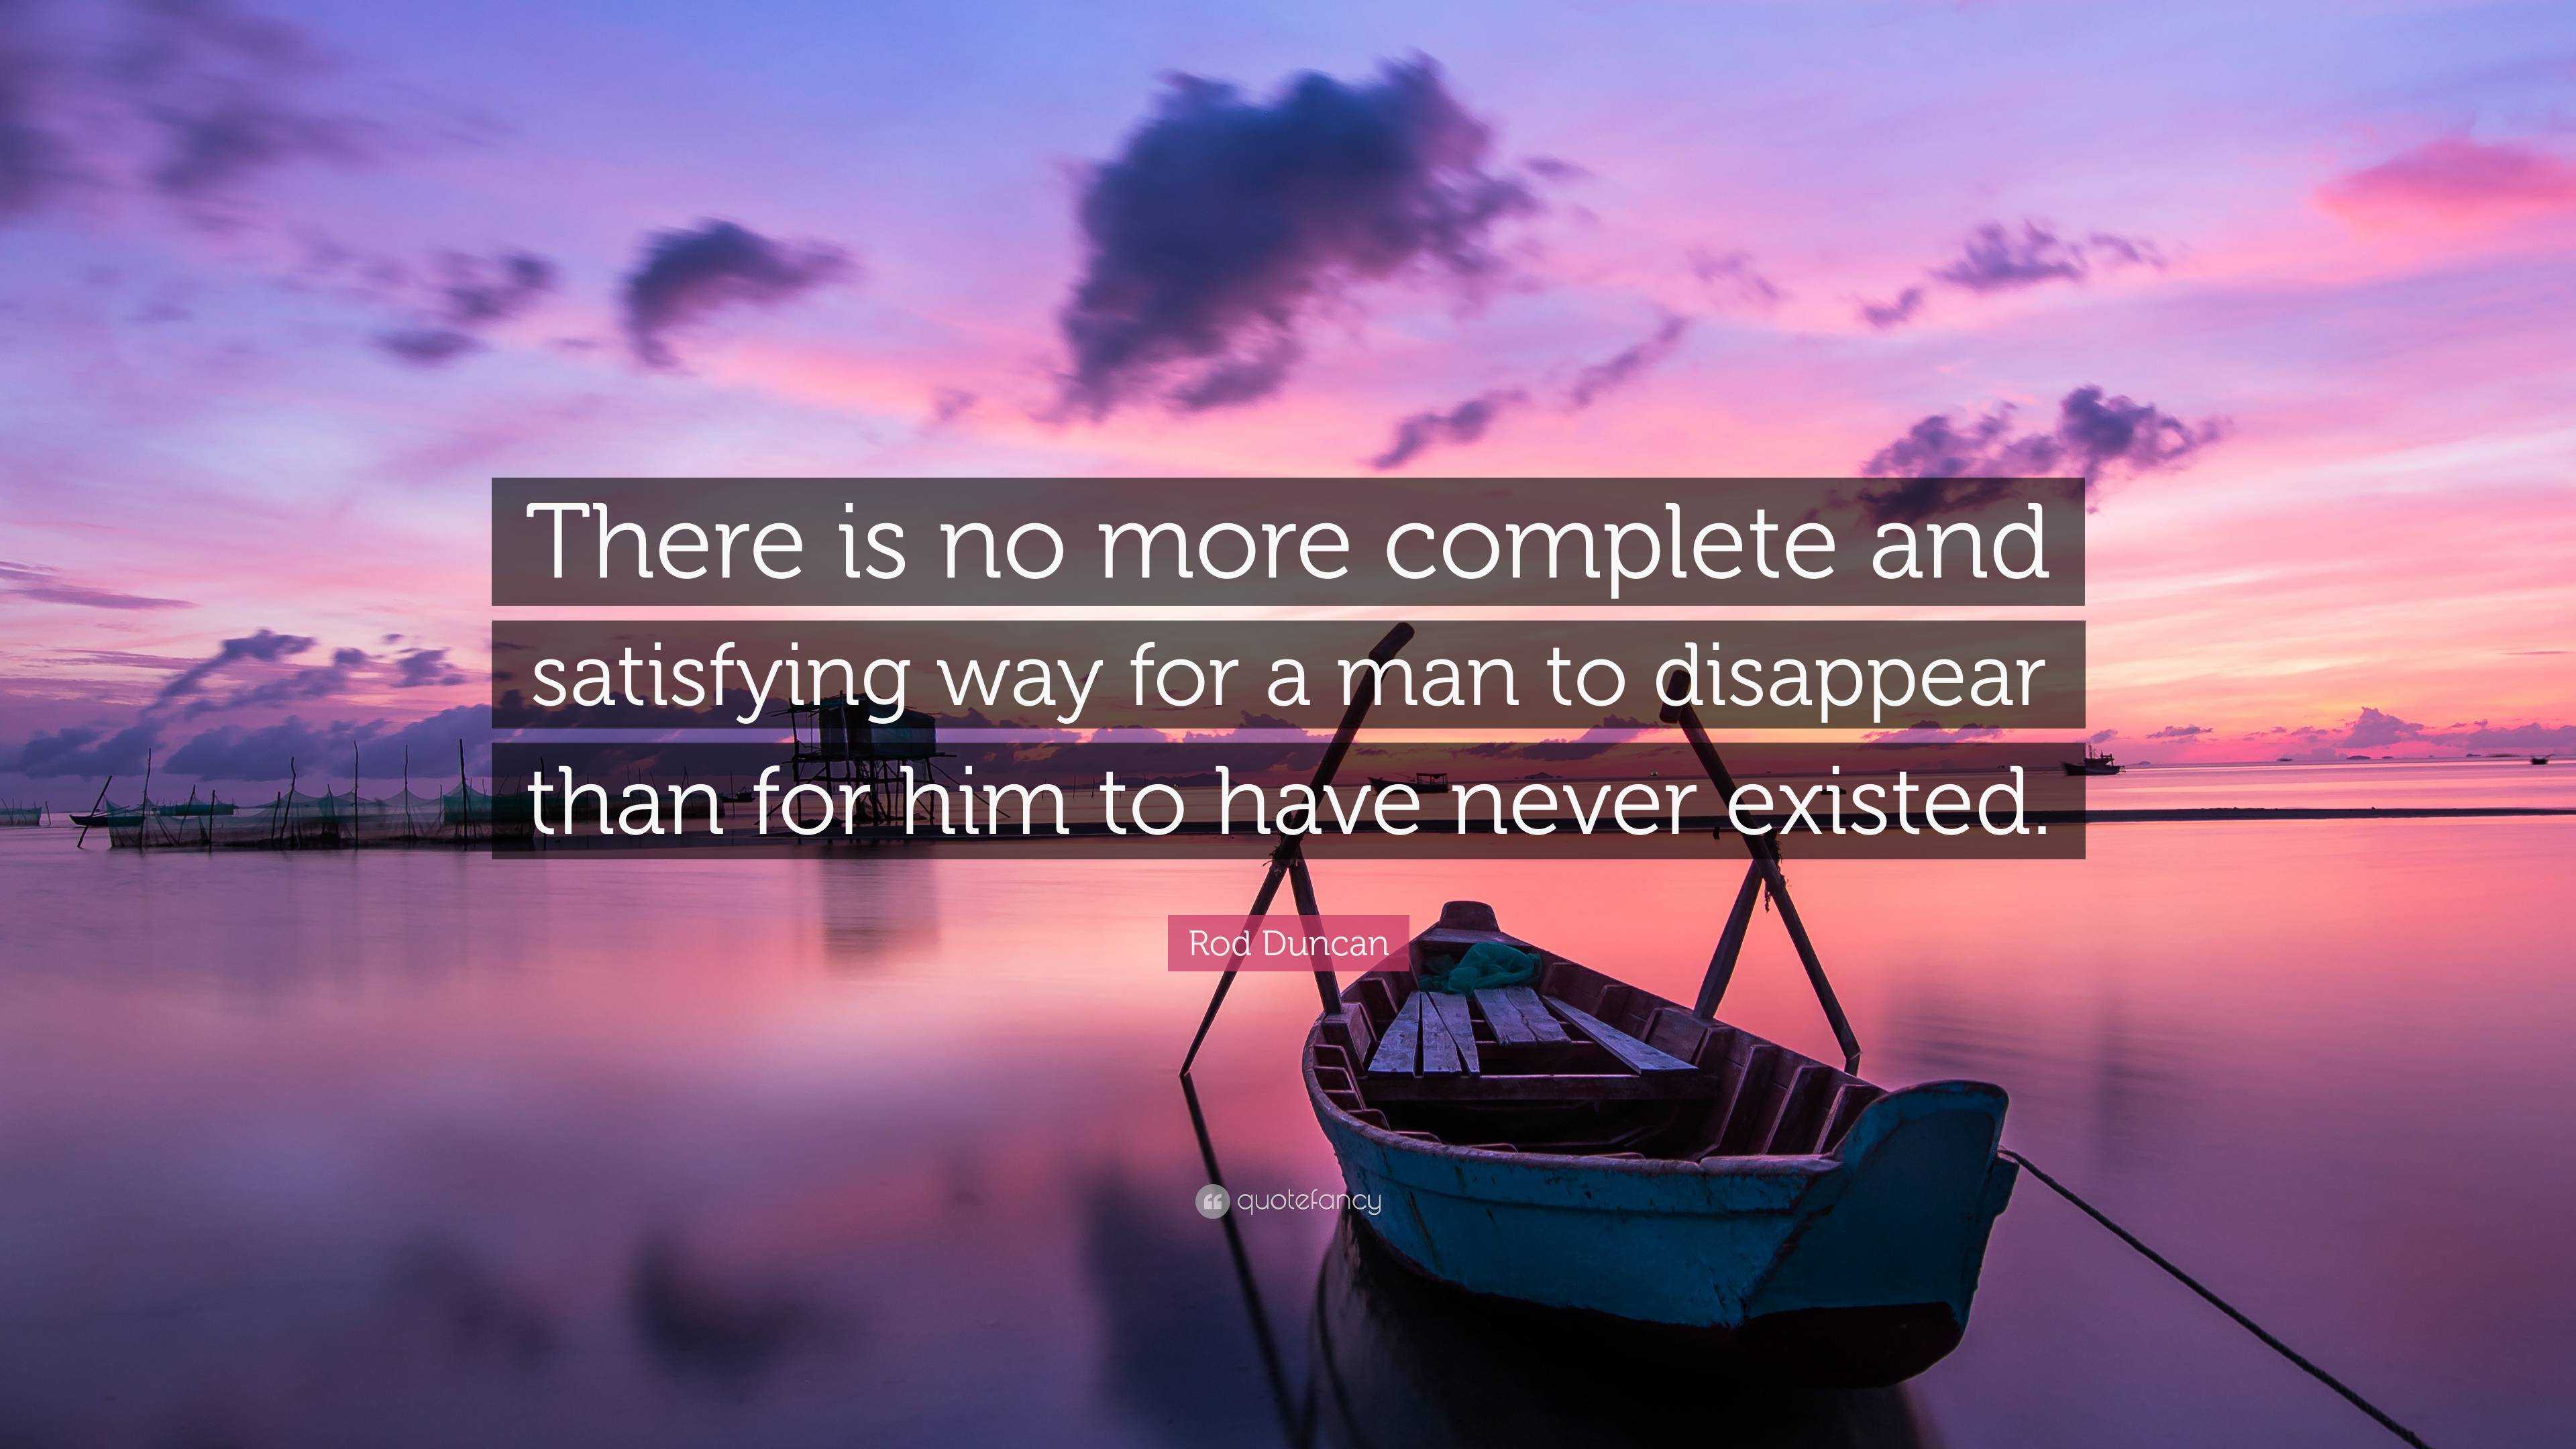 Rod Duncan Quote: “There is no more complete and satisfying way for a